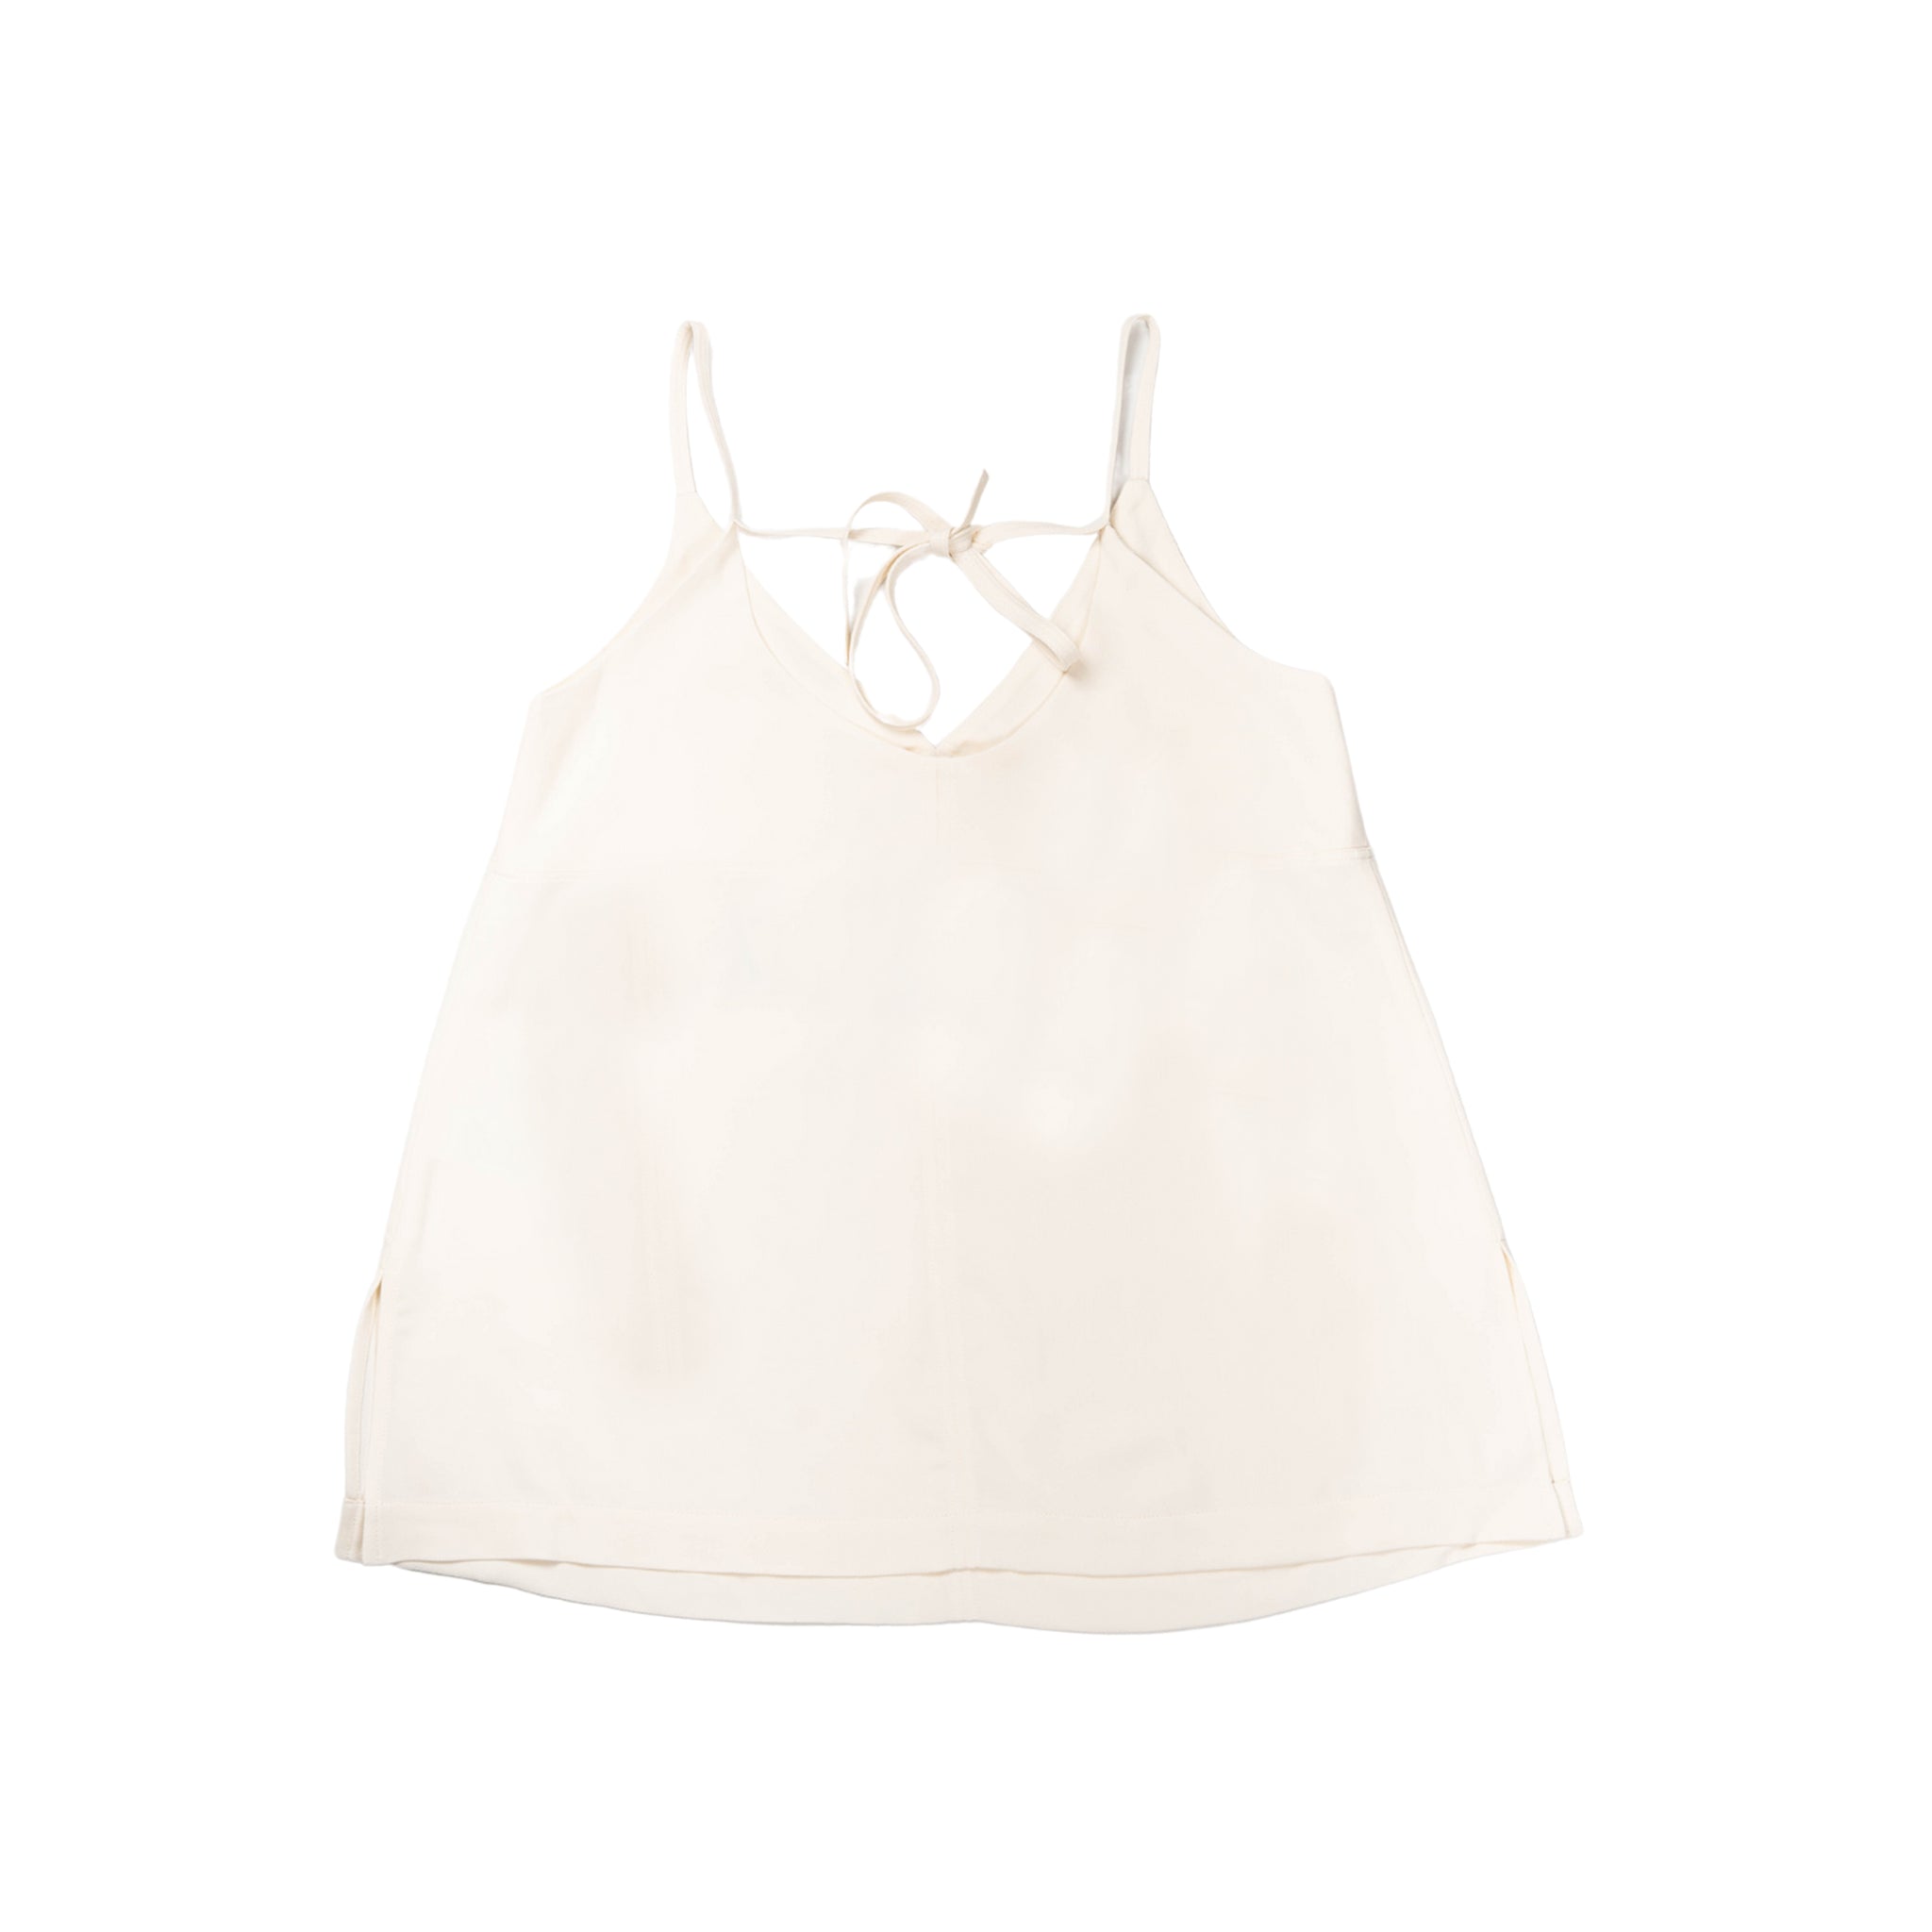 Cami top in bianco sporco